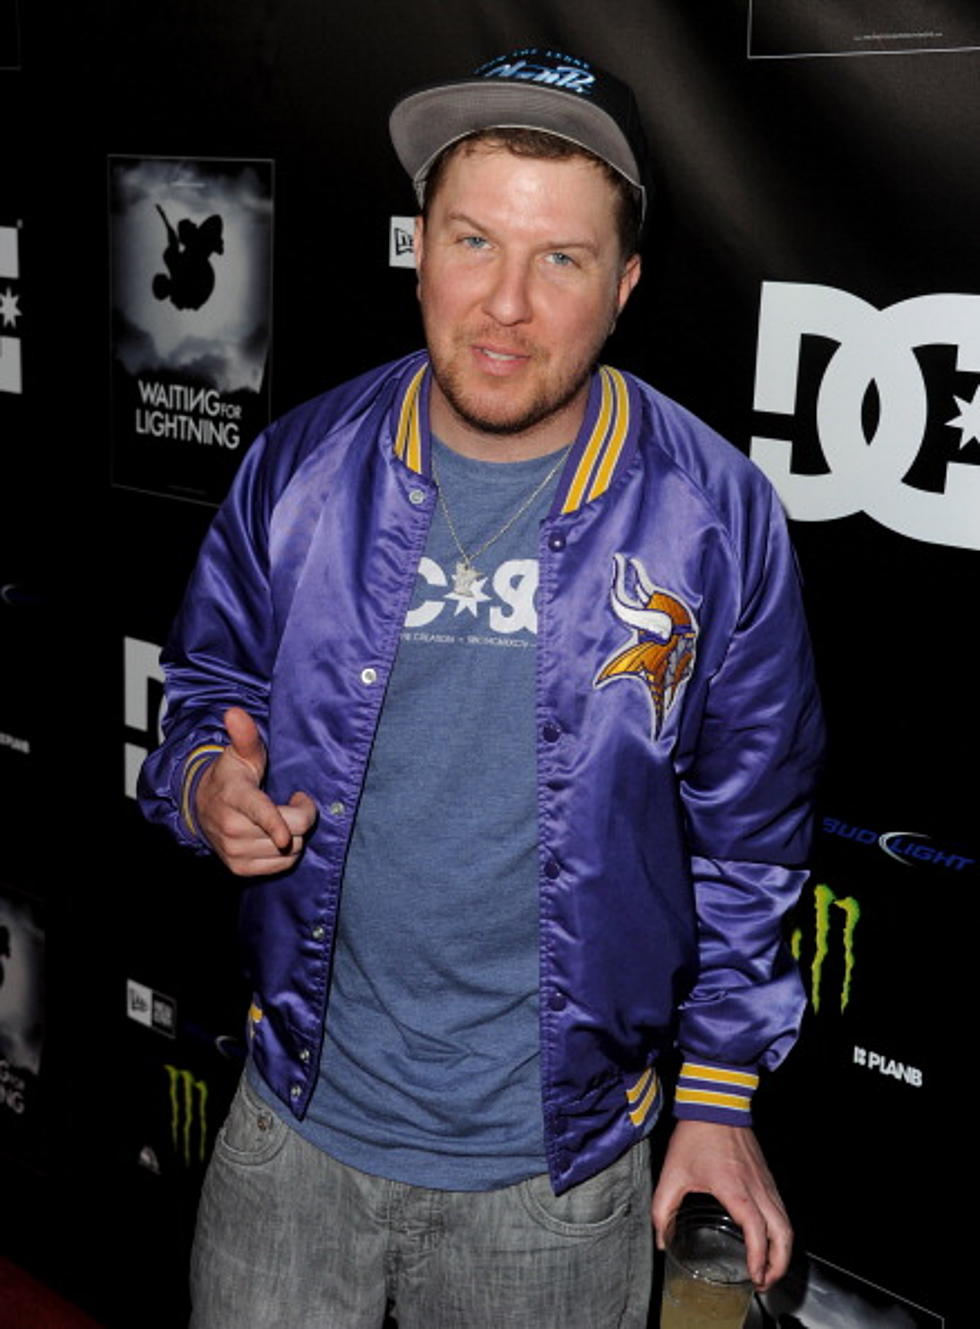 Nick Swardson’s NSFW Reaction To Pujols’ 600th Home Run At Twins Game